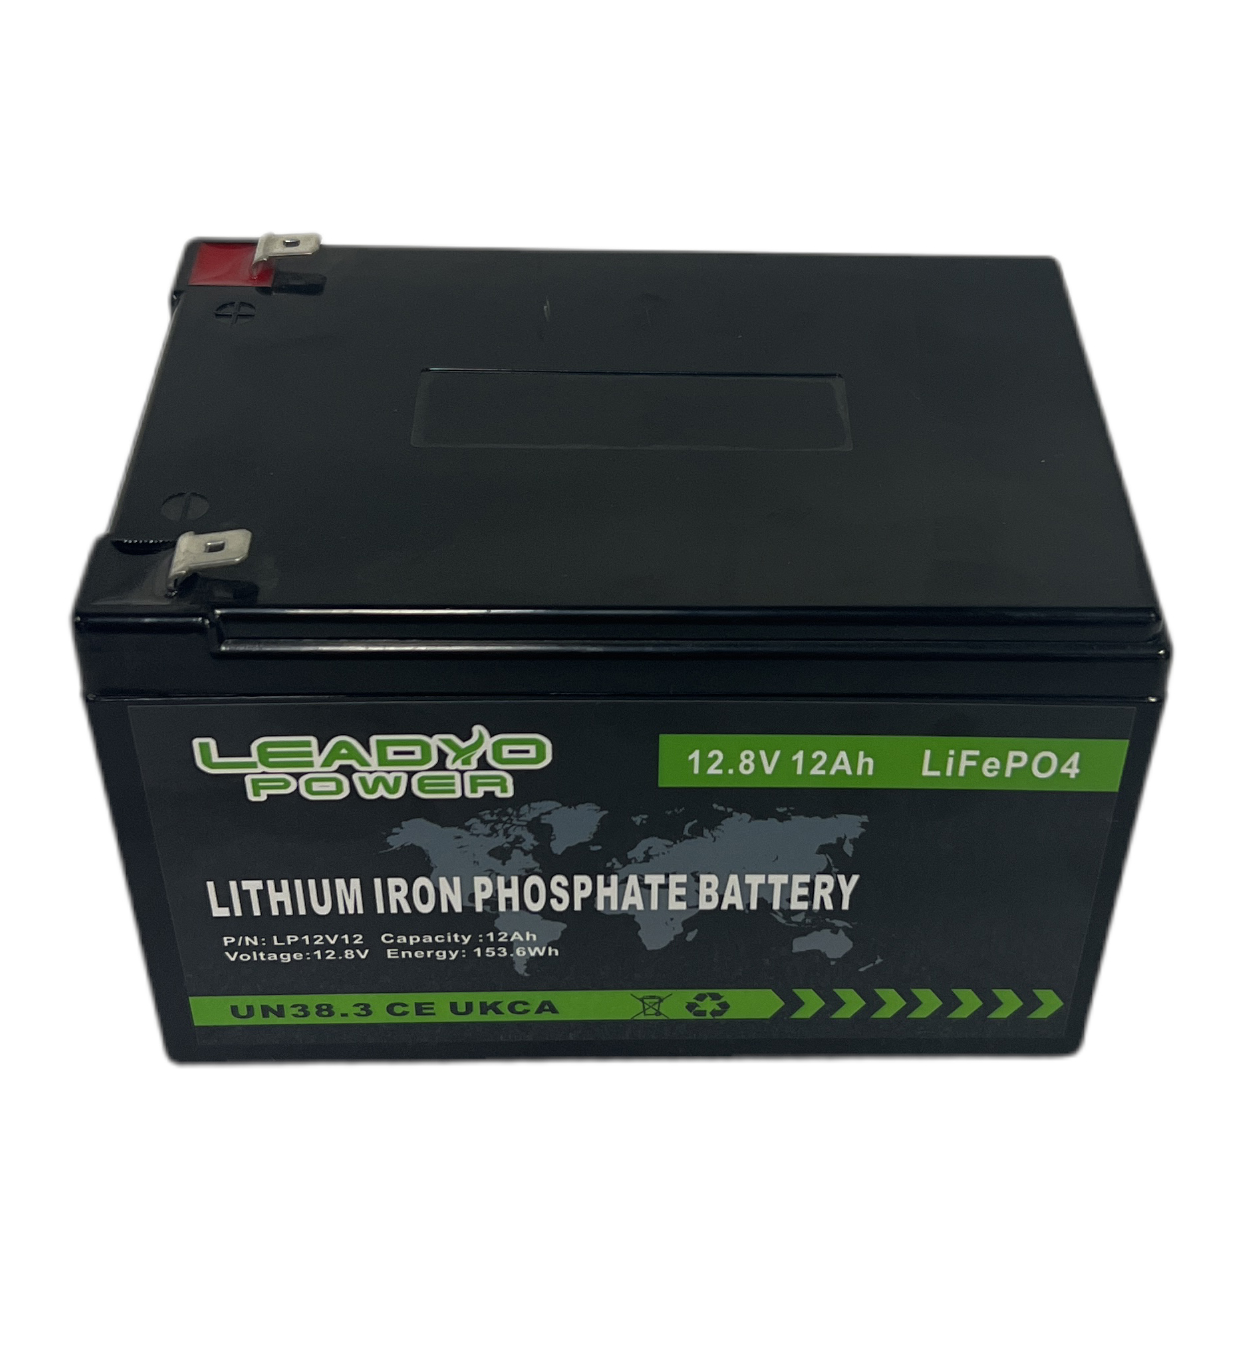 Leadyo Power: Your Source for Reliable LiFePO4 Battery Packs